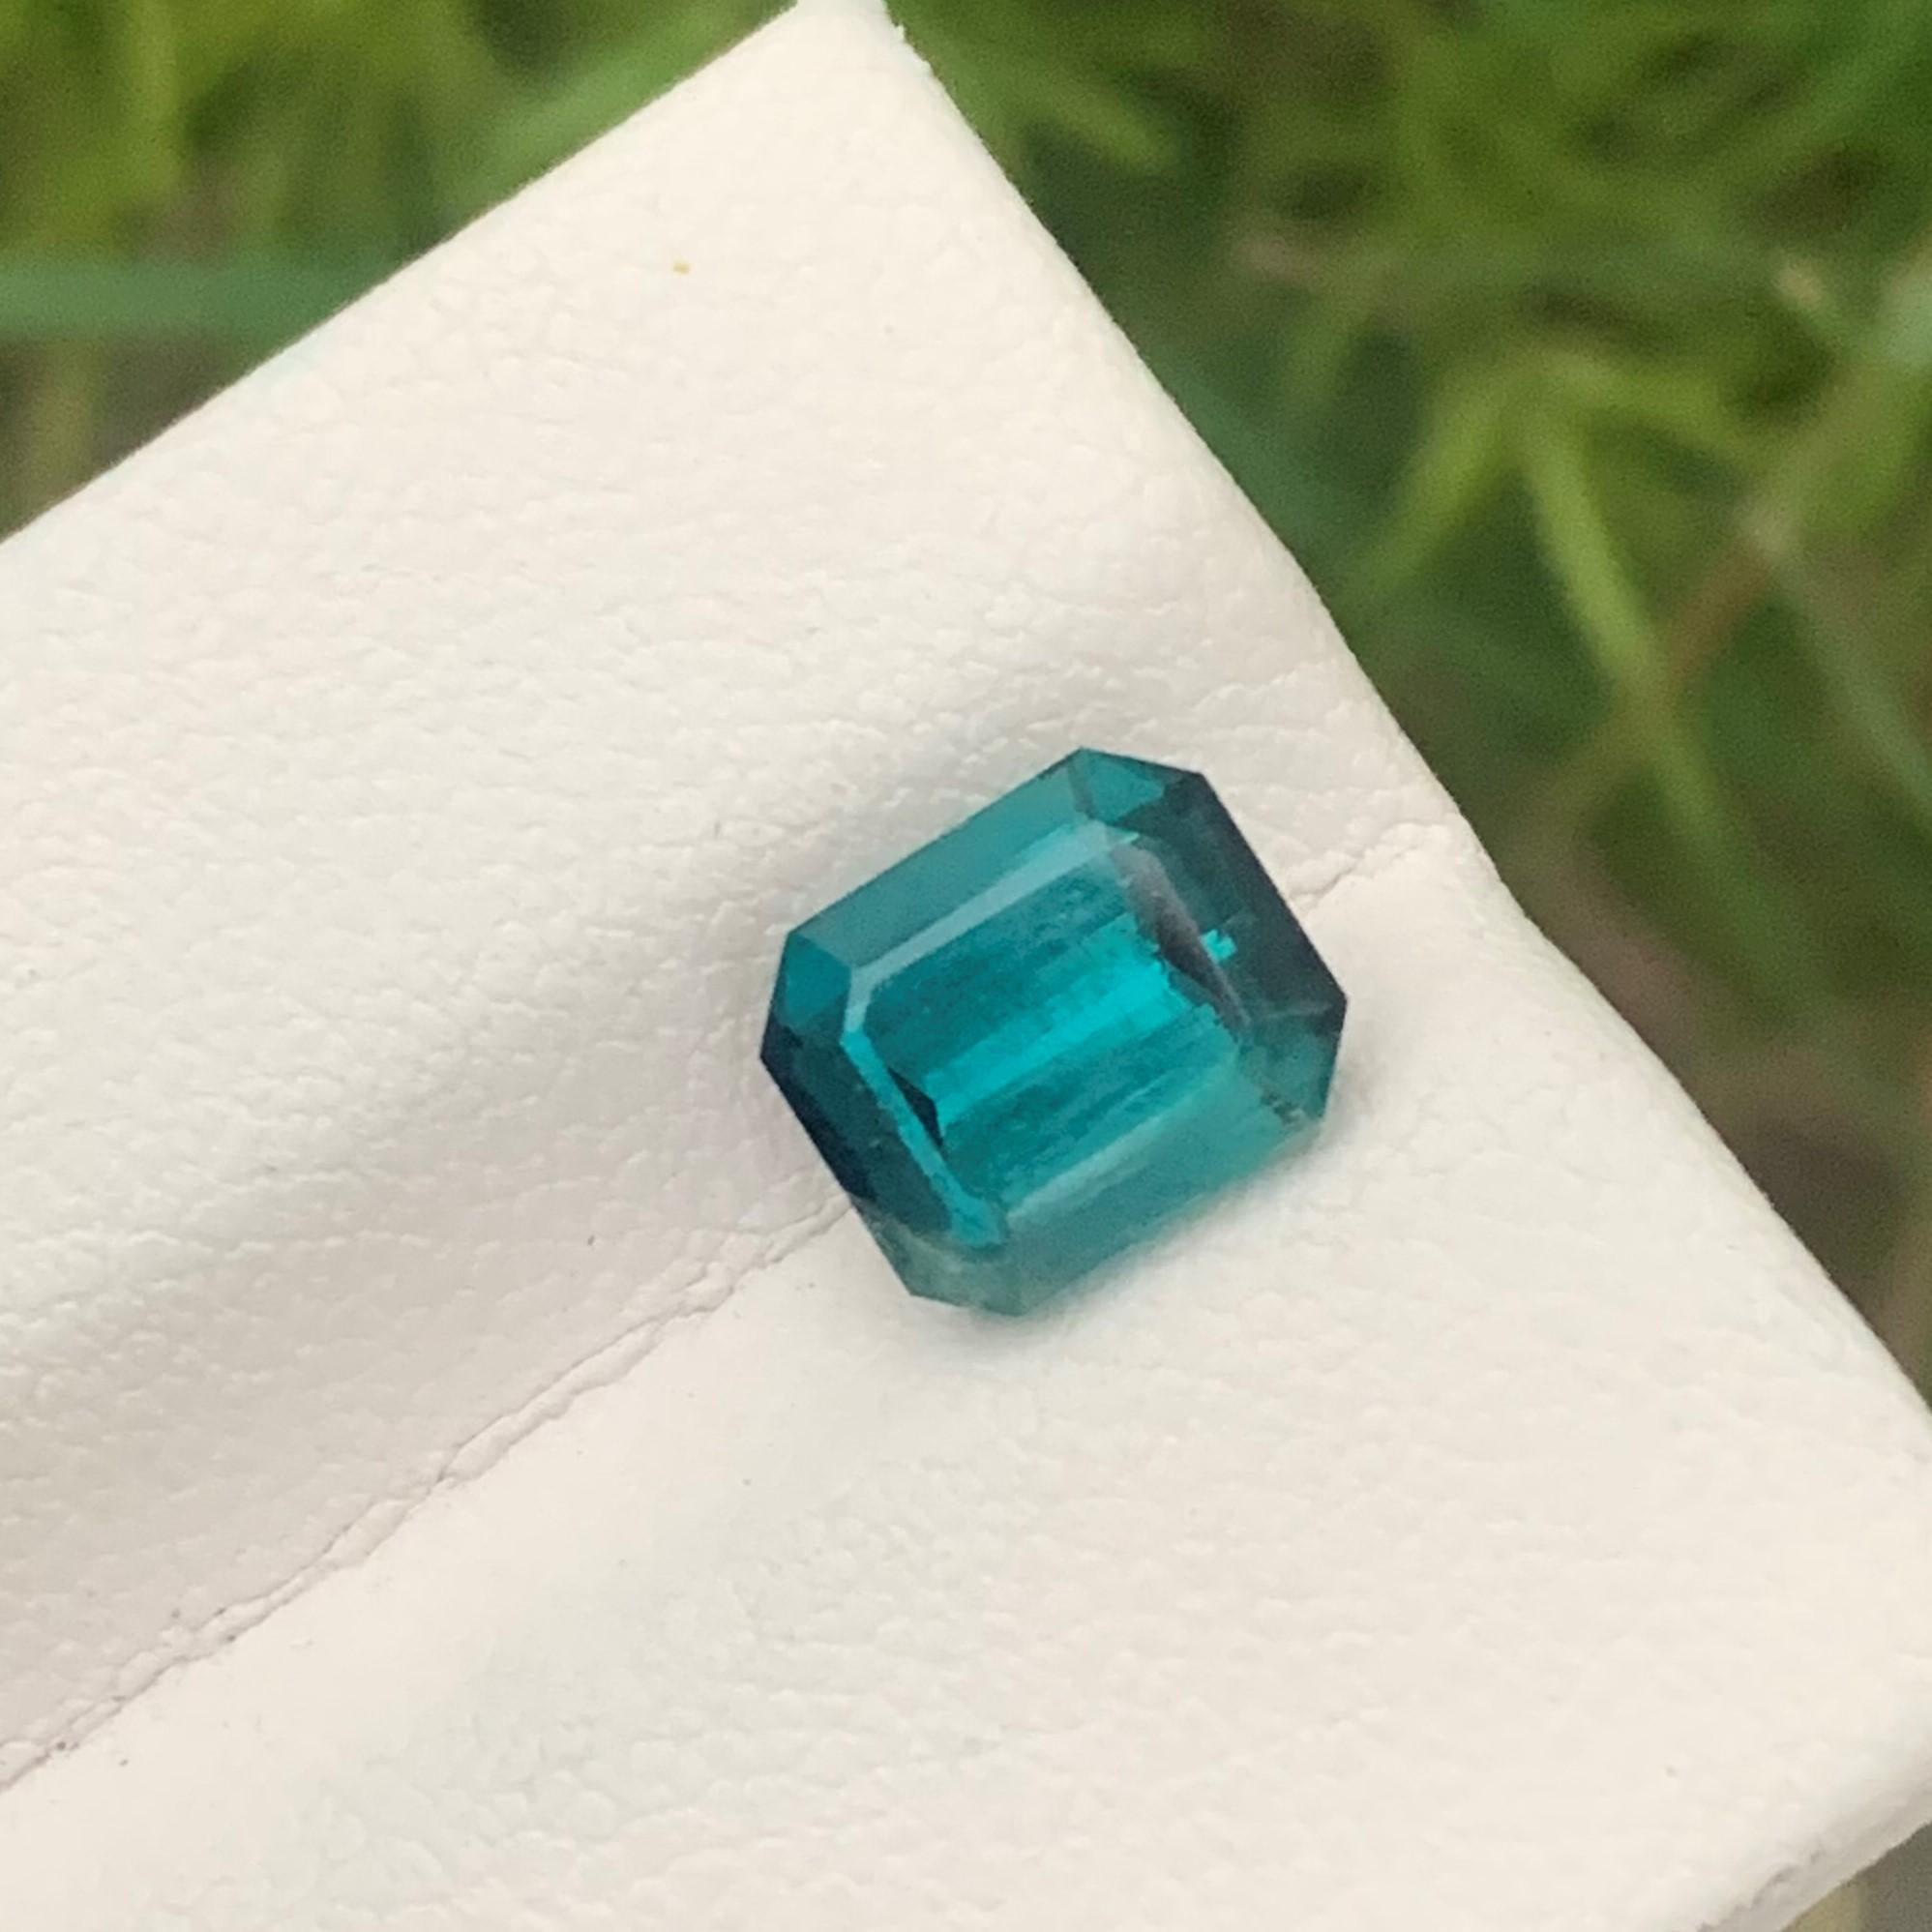 Gorgeous Loose Indicolite Tourmaline
Weight: 2.75 Carats
Dimension: 8.1x6.9x5.9 Mm
Origin; Kunar Afghanistan Mine
Color: Blue
Clarity: Included
Shape: Emerald
Treatment: Non
Certificate: On Demand
.
Indicolite tourmalines (tourmalines with blue in